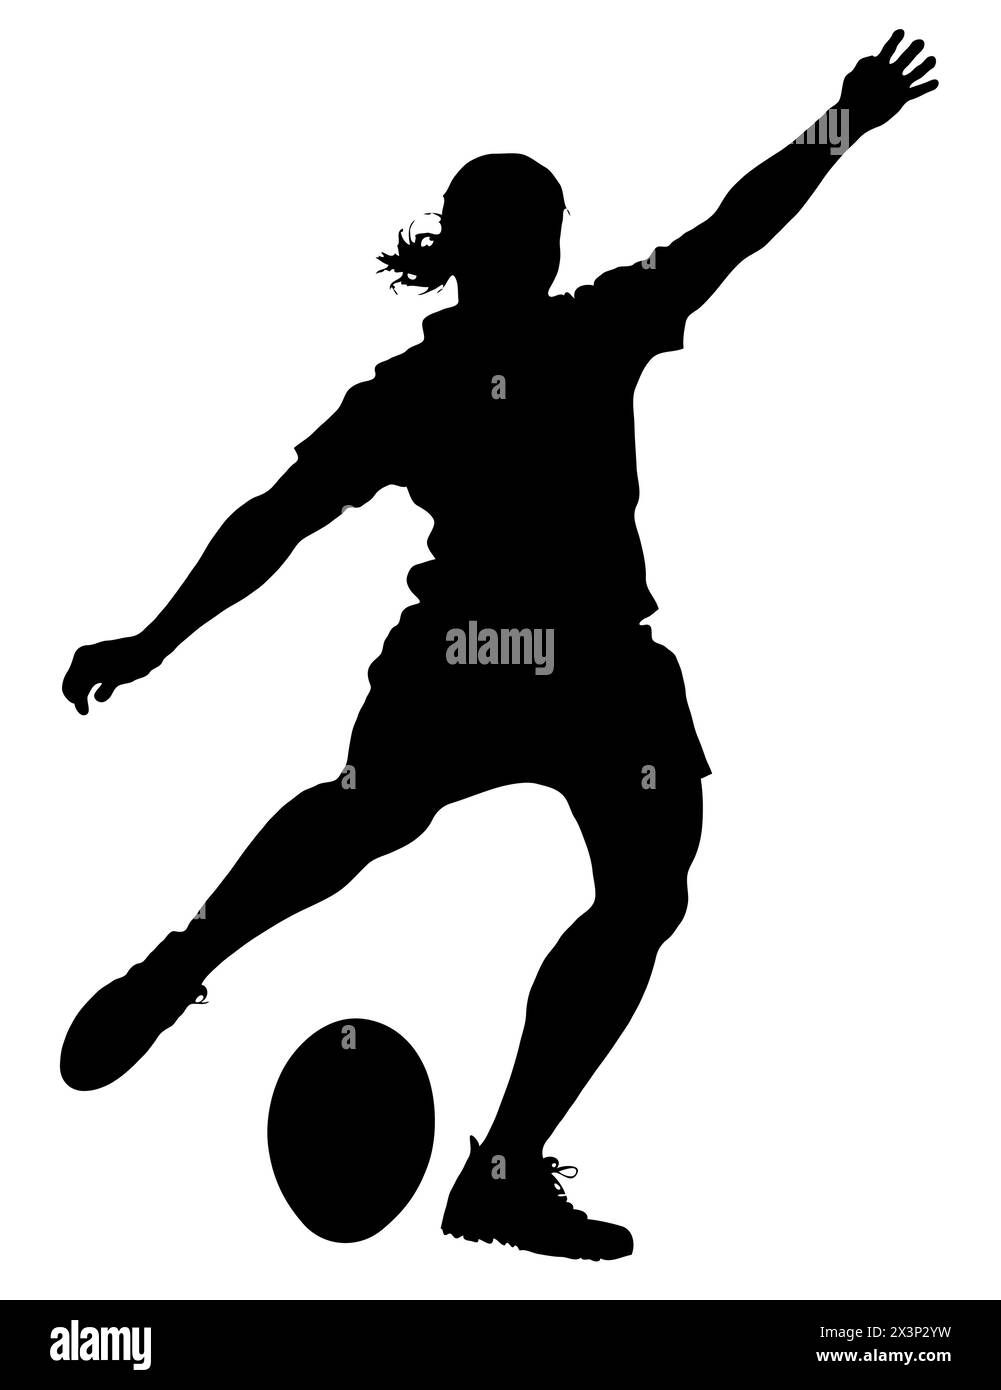 Detailed Sport Silhouette - Woman or Female Rugby Player Kicker Stock Vector